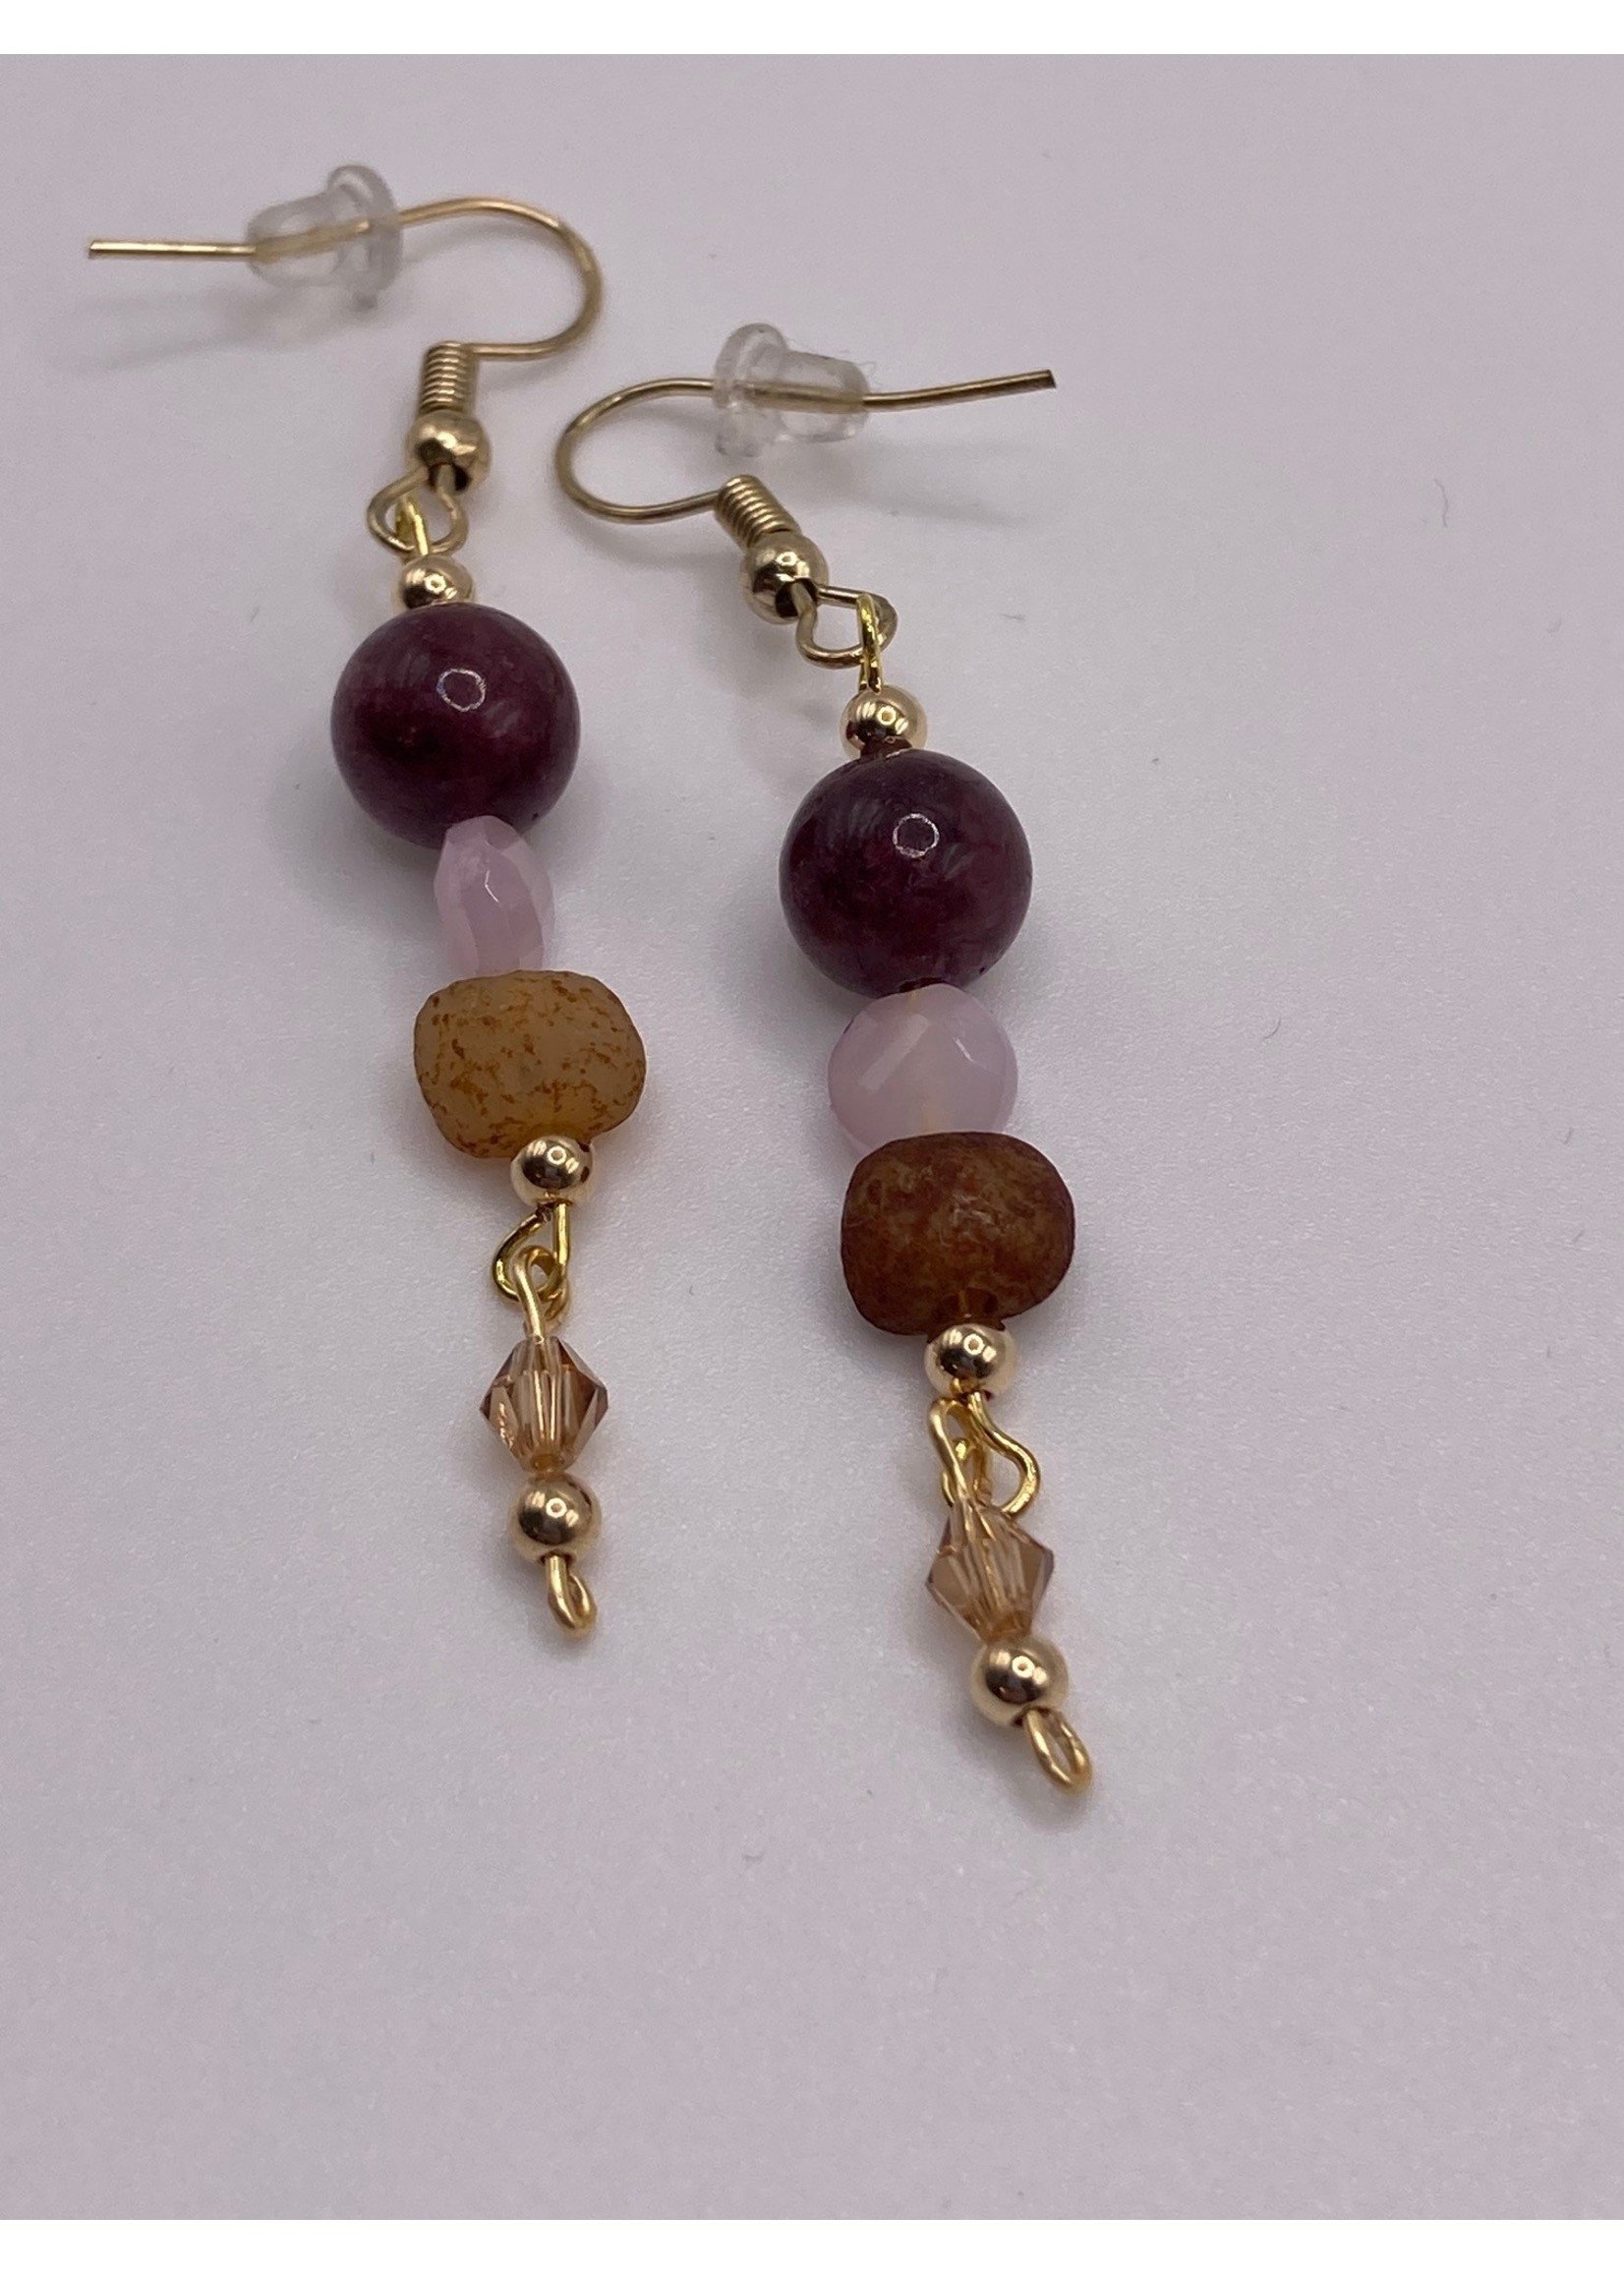 Our Twisted Dahlia Amethyst, Pink Quartz, and Caramel Agate Drop Earrings